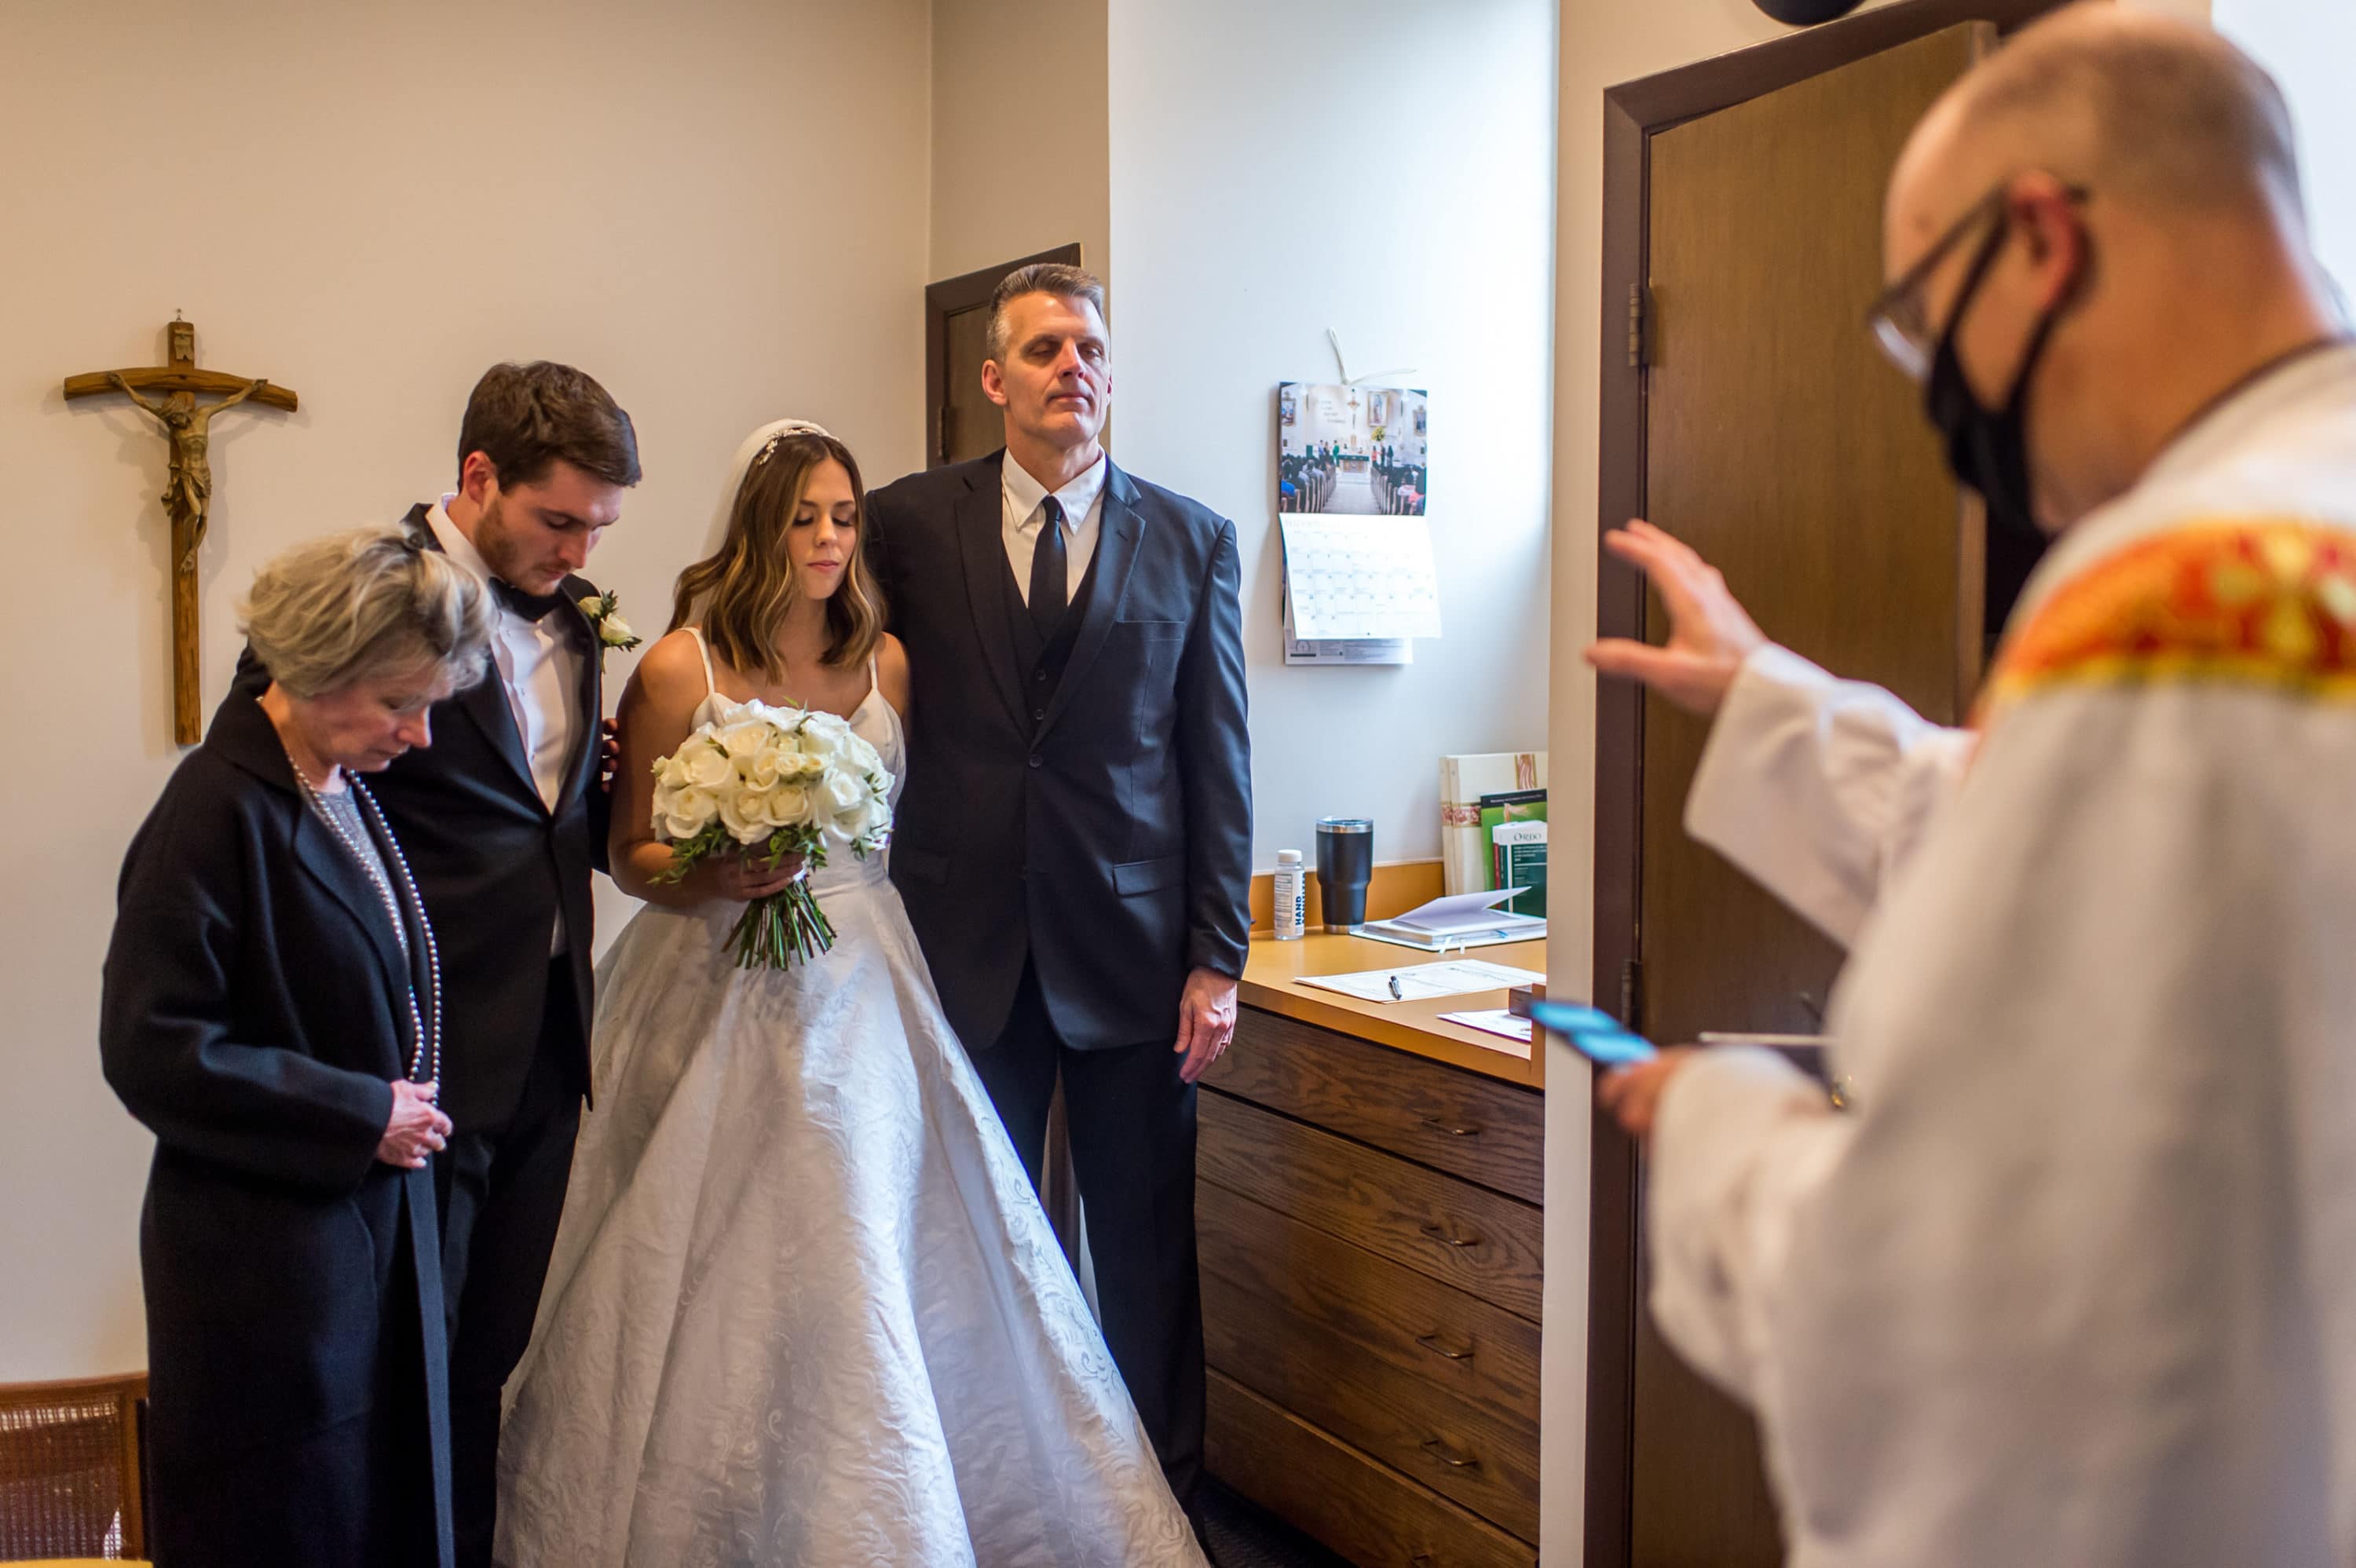 A priest blesses the bride, groom and family after a Blessed Sacrament Denver wedding ceremony.